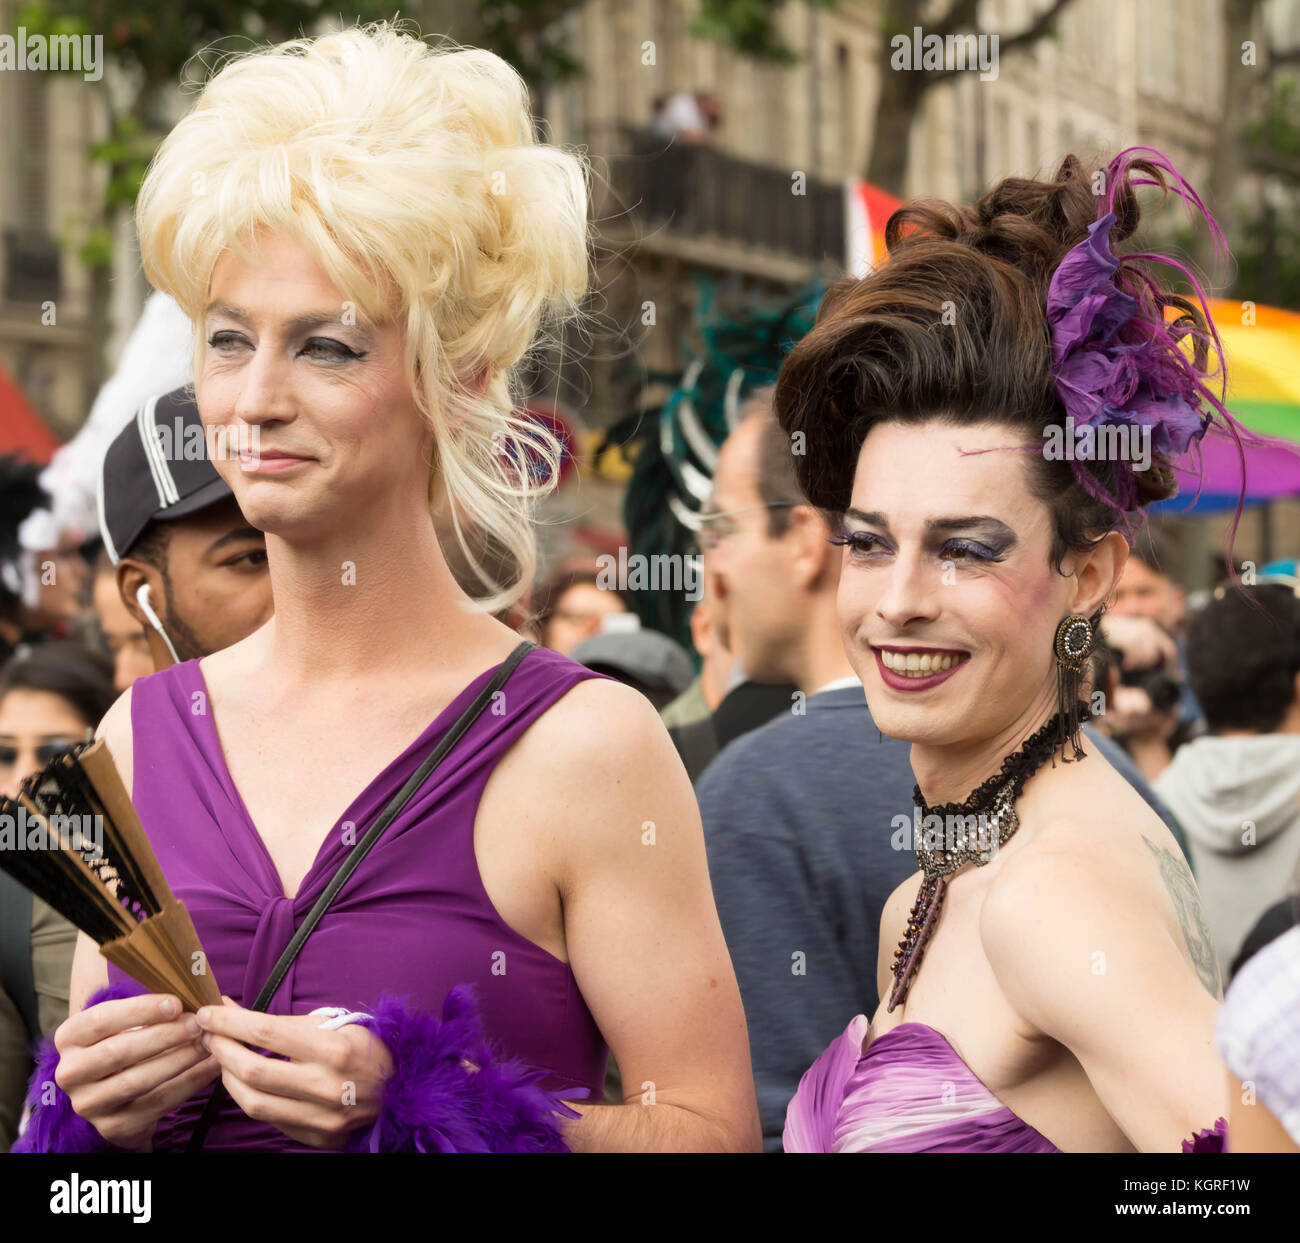 The participants of Gay pride parade in Paris, France. Stock Photo